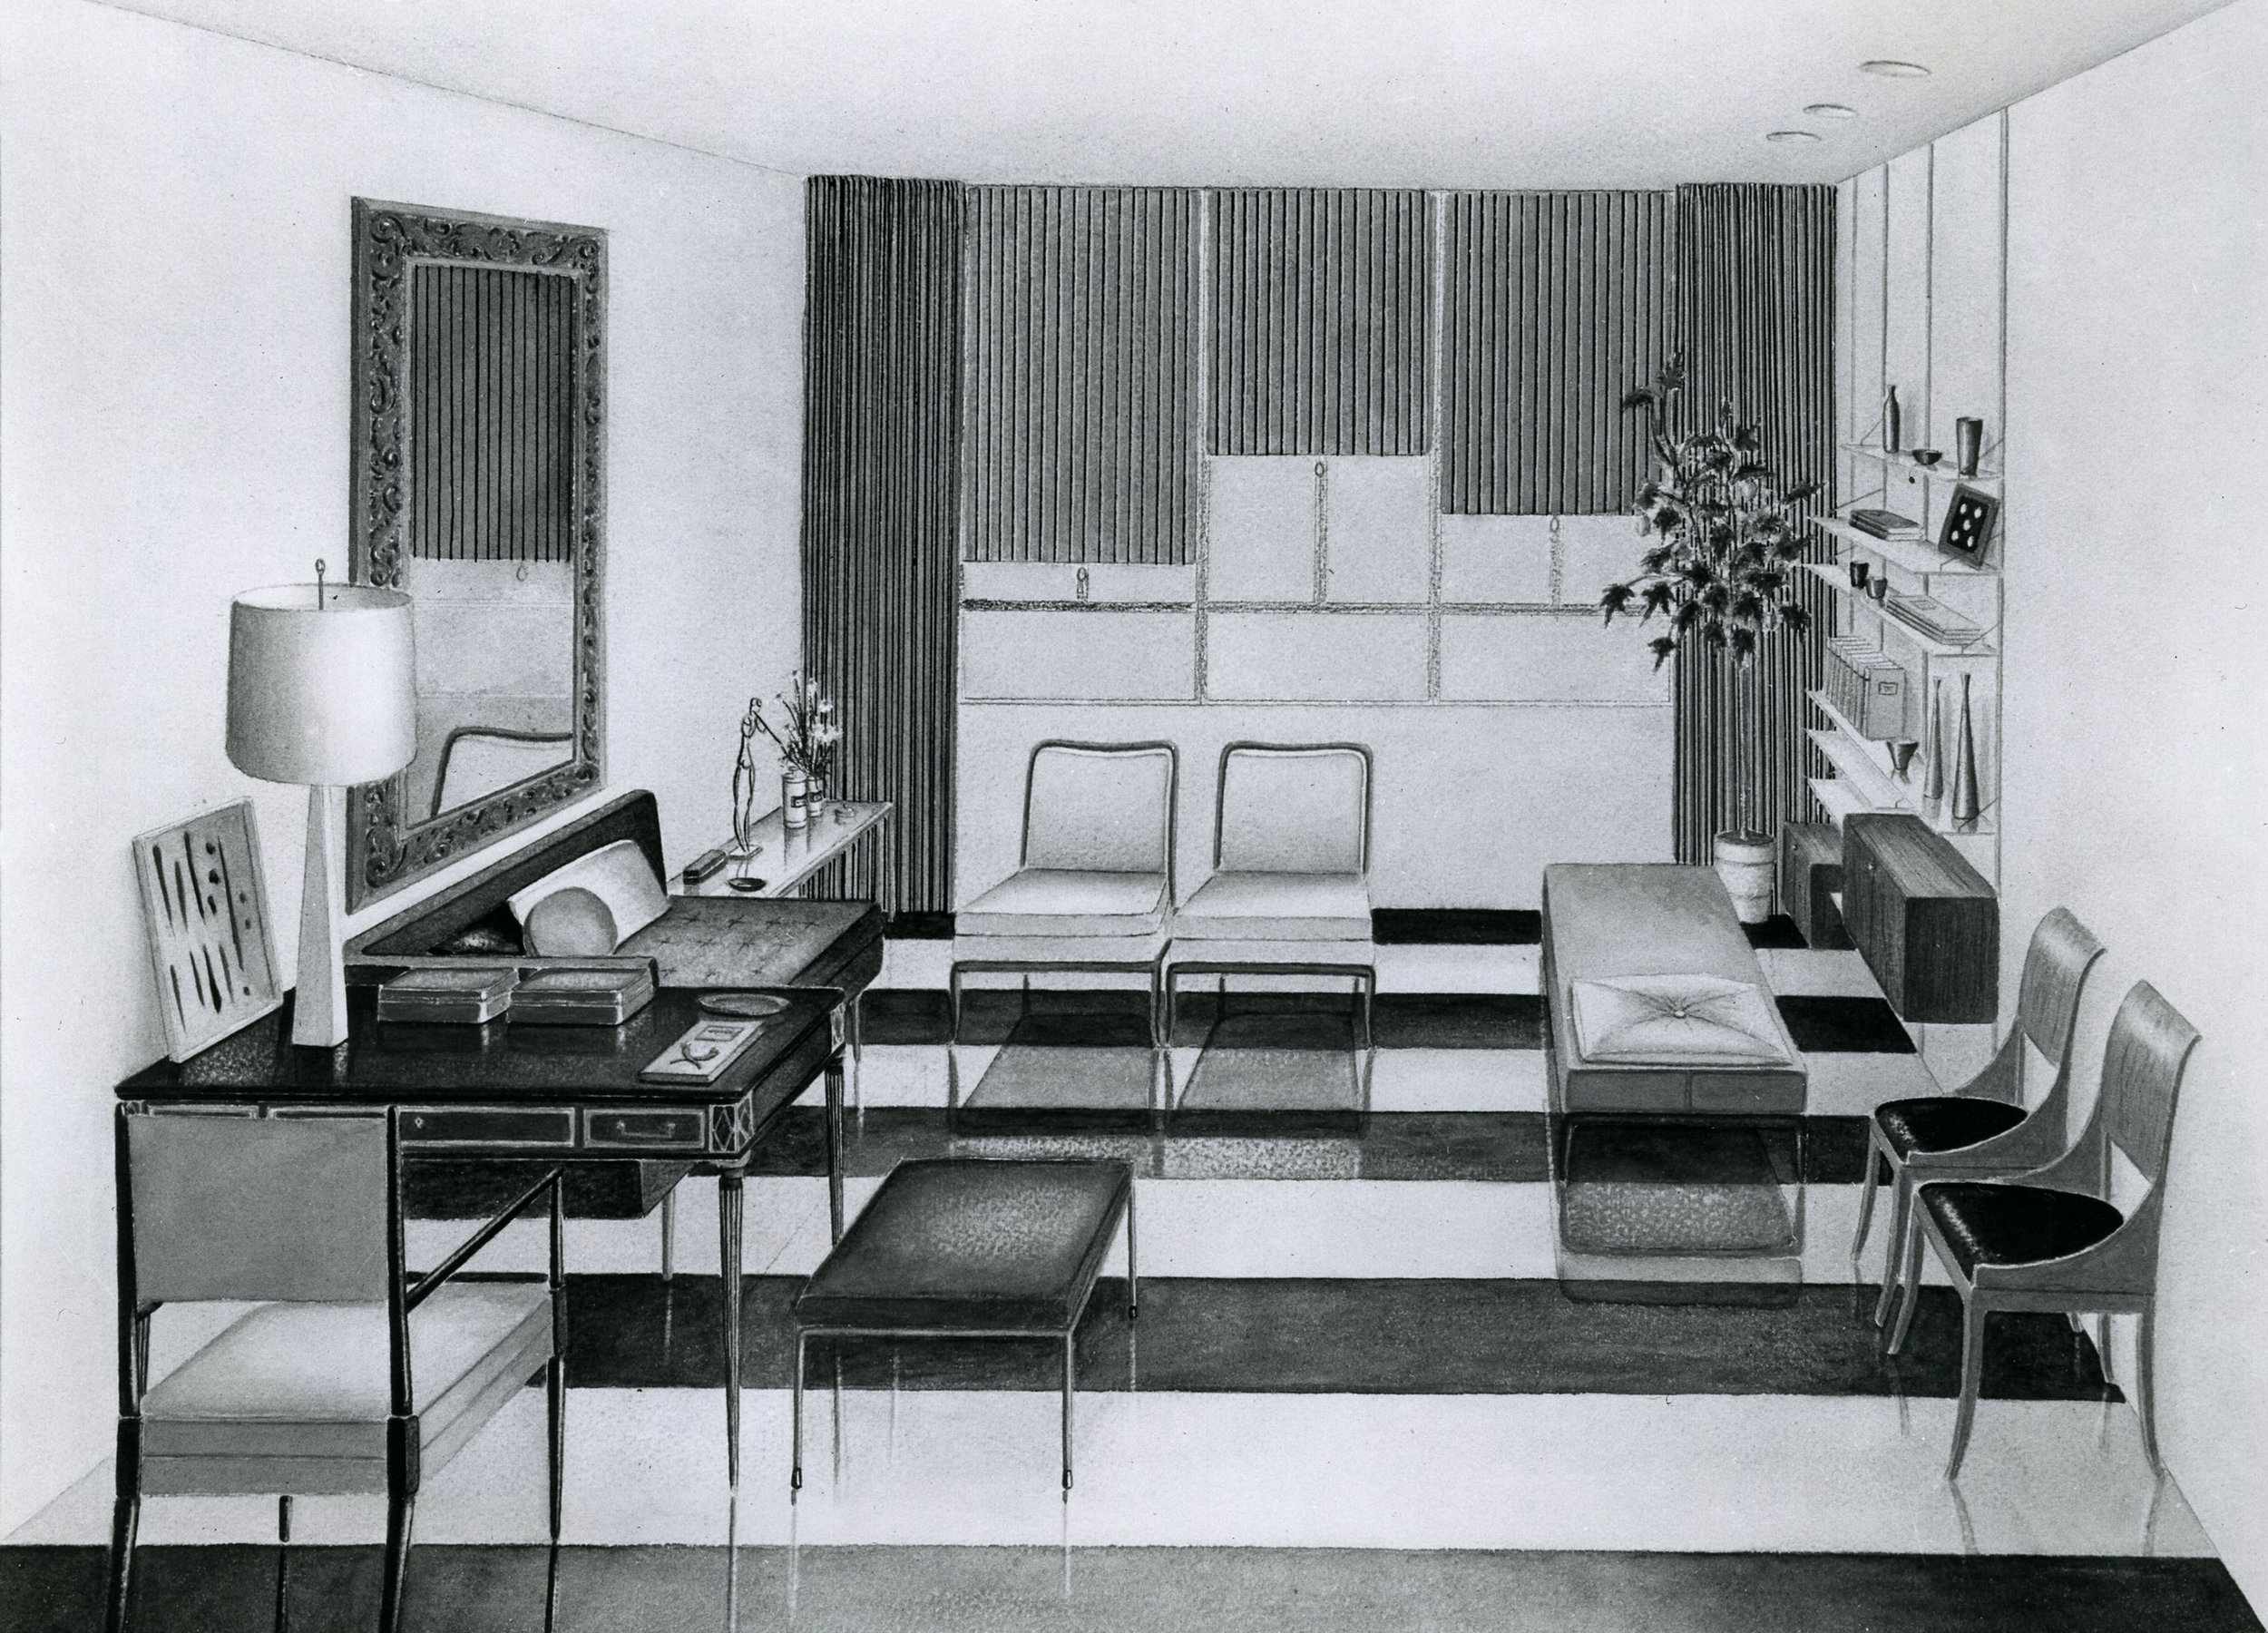 student-drawings-of-a-one-room-house-from-the-1950s_23858082254_o.jpg